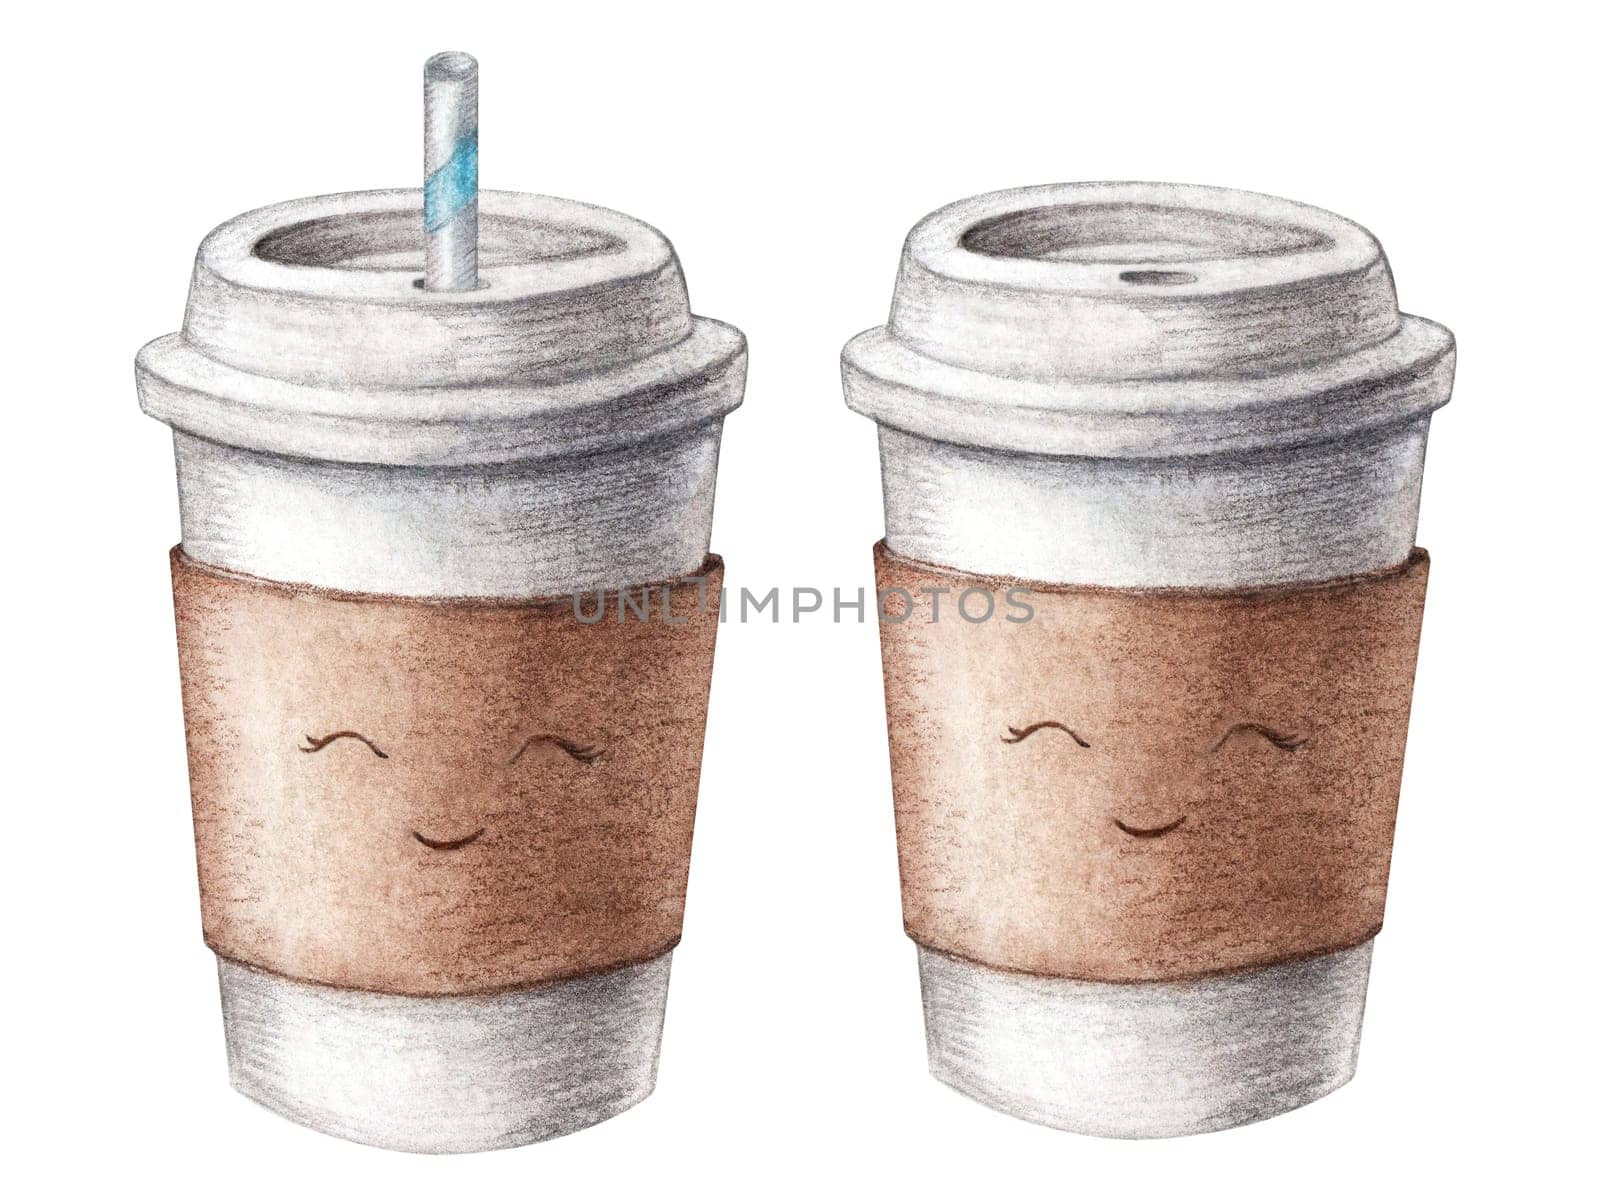 Hand drawn watercolor cardboard paper cute coffee cup set with a tubule straw, take away, isolated on white background. Food illustration, coffee to go. Watercolor painting. High quality illustration